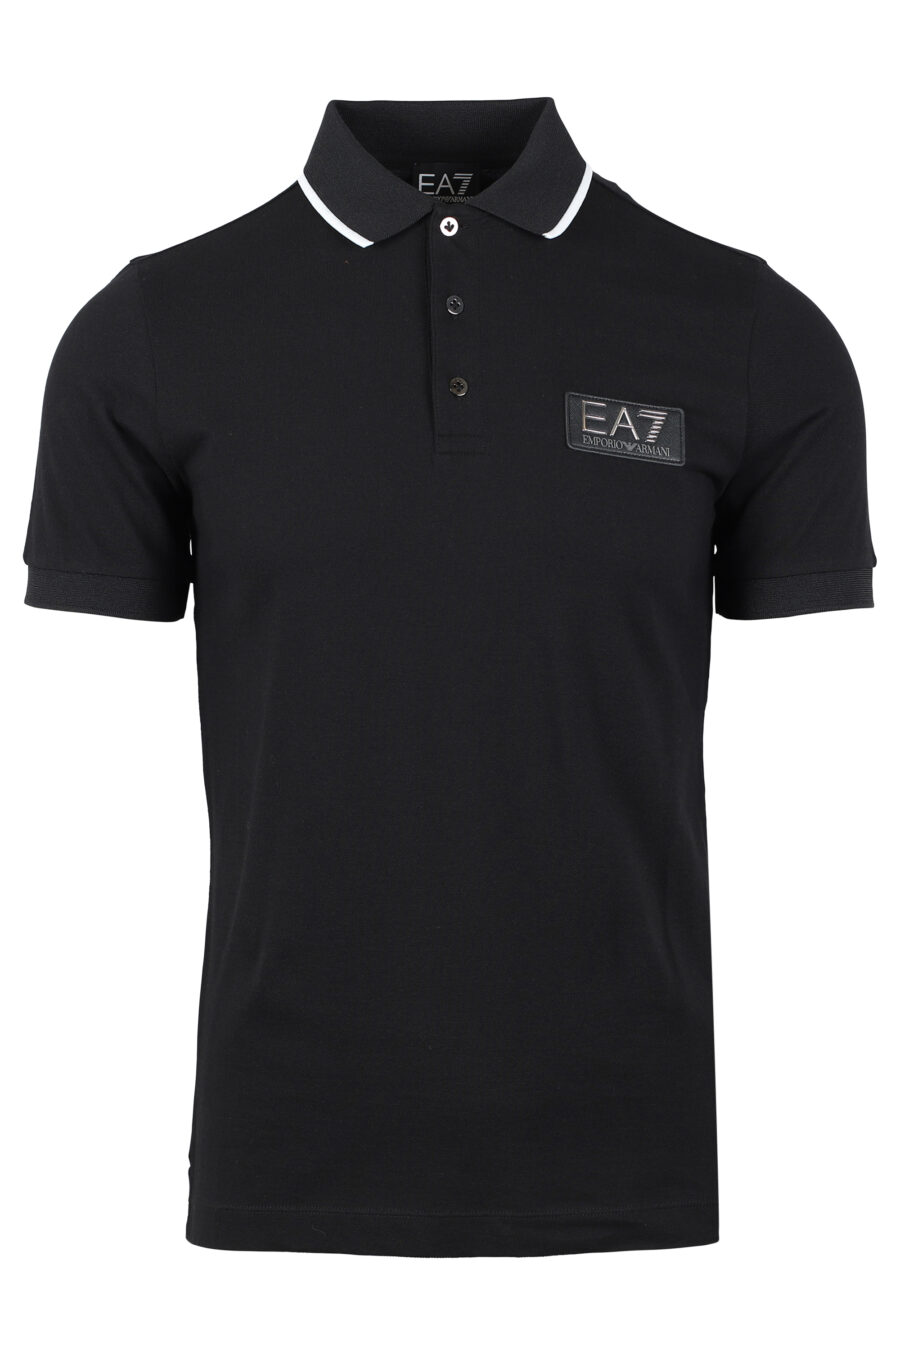 Black polo shirt with logo badge and collar with white line - IMG 4632